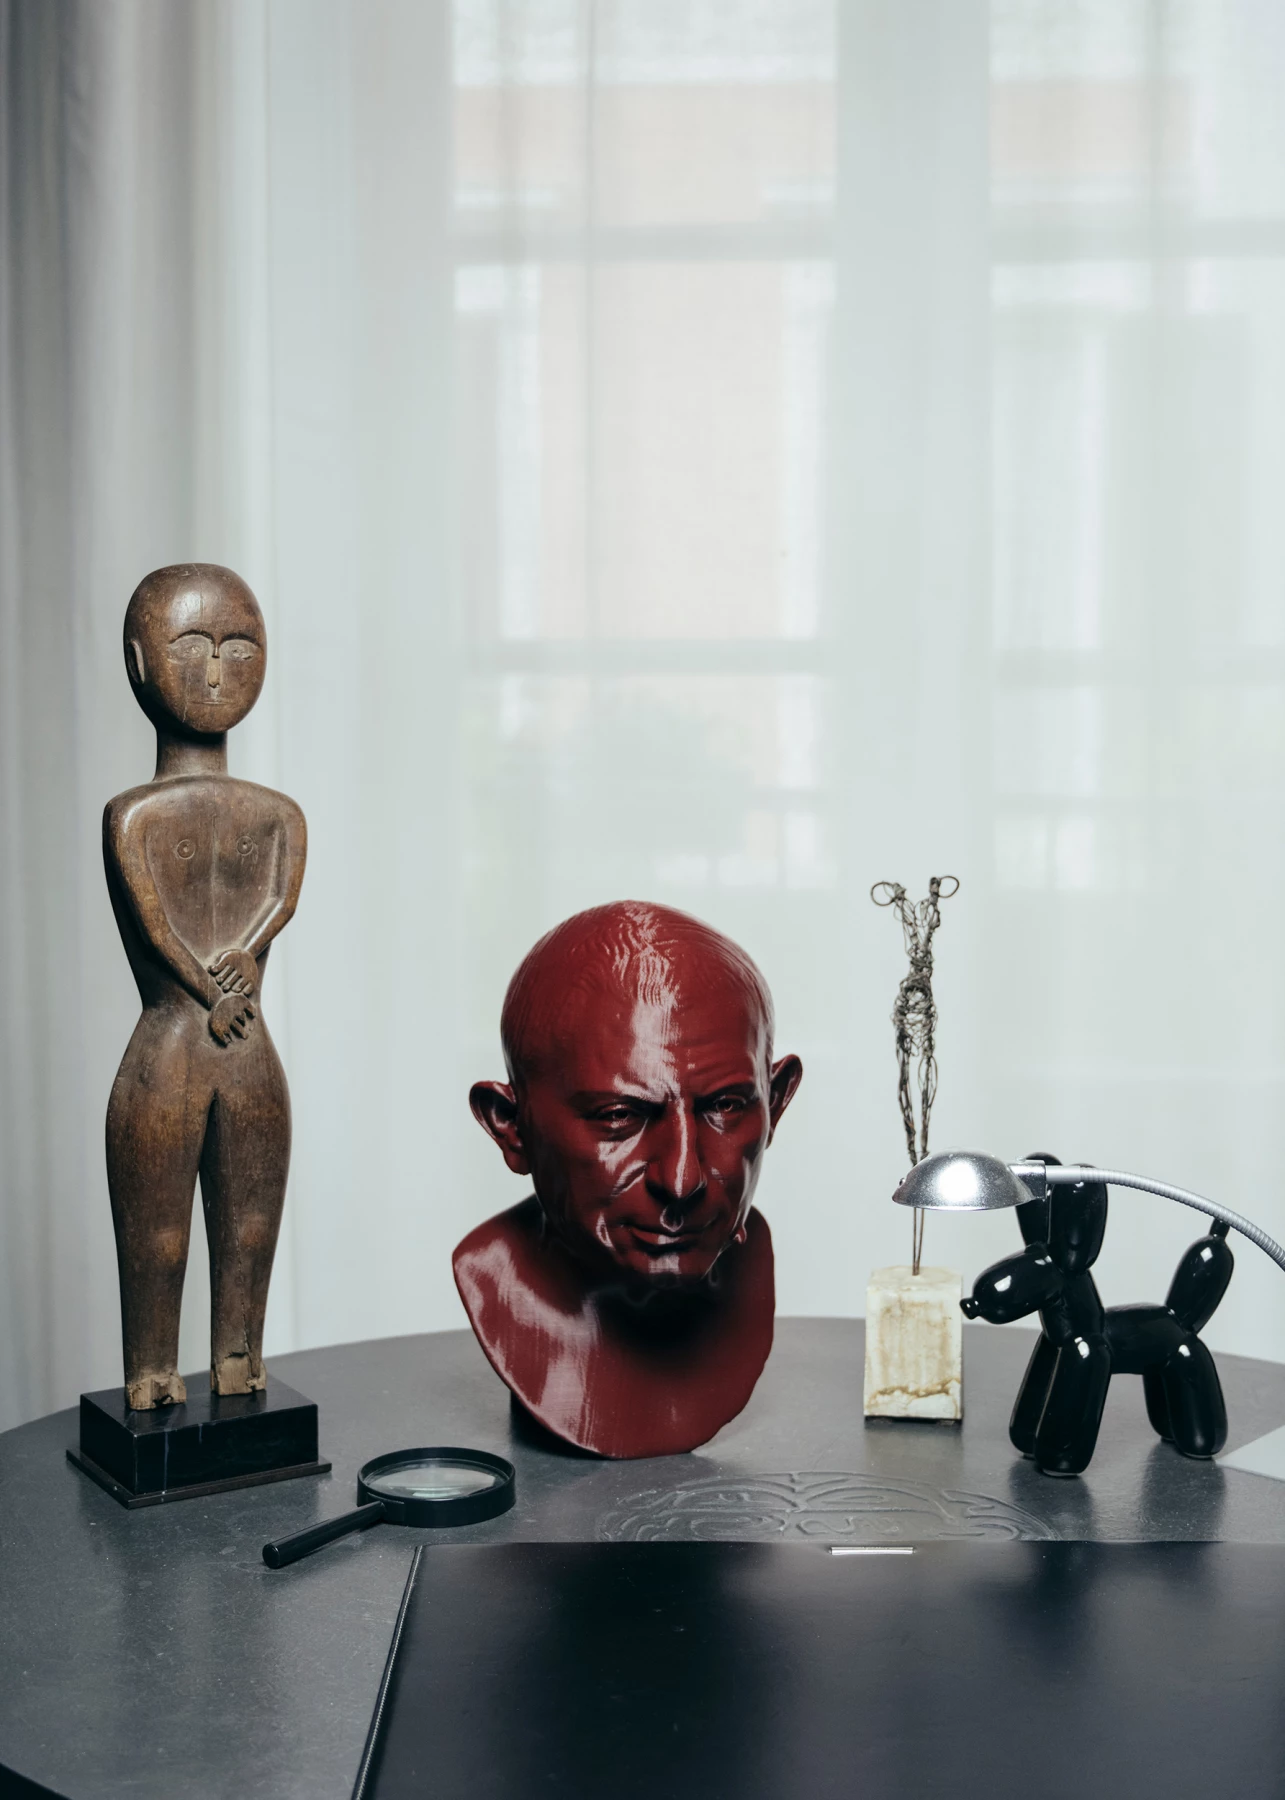 “Lucius Caecilius Iucundus” by Unidentified Sculptors  from the Private Collections collection